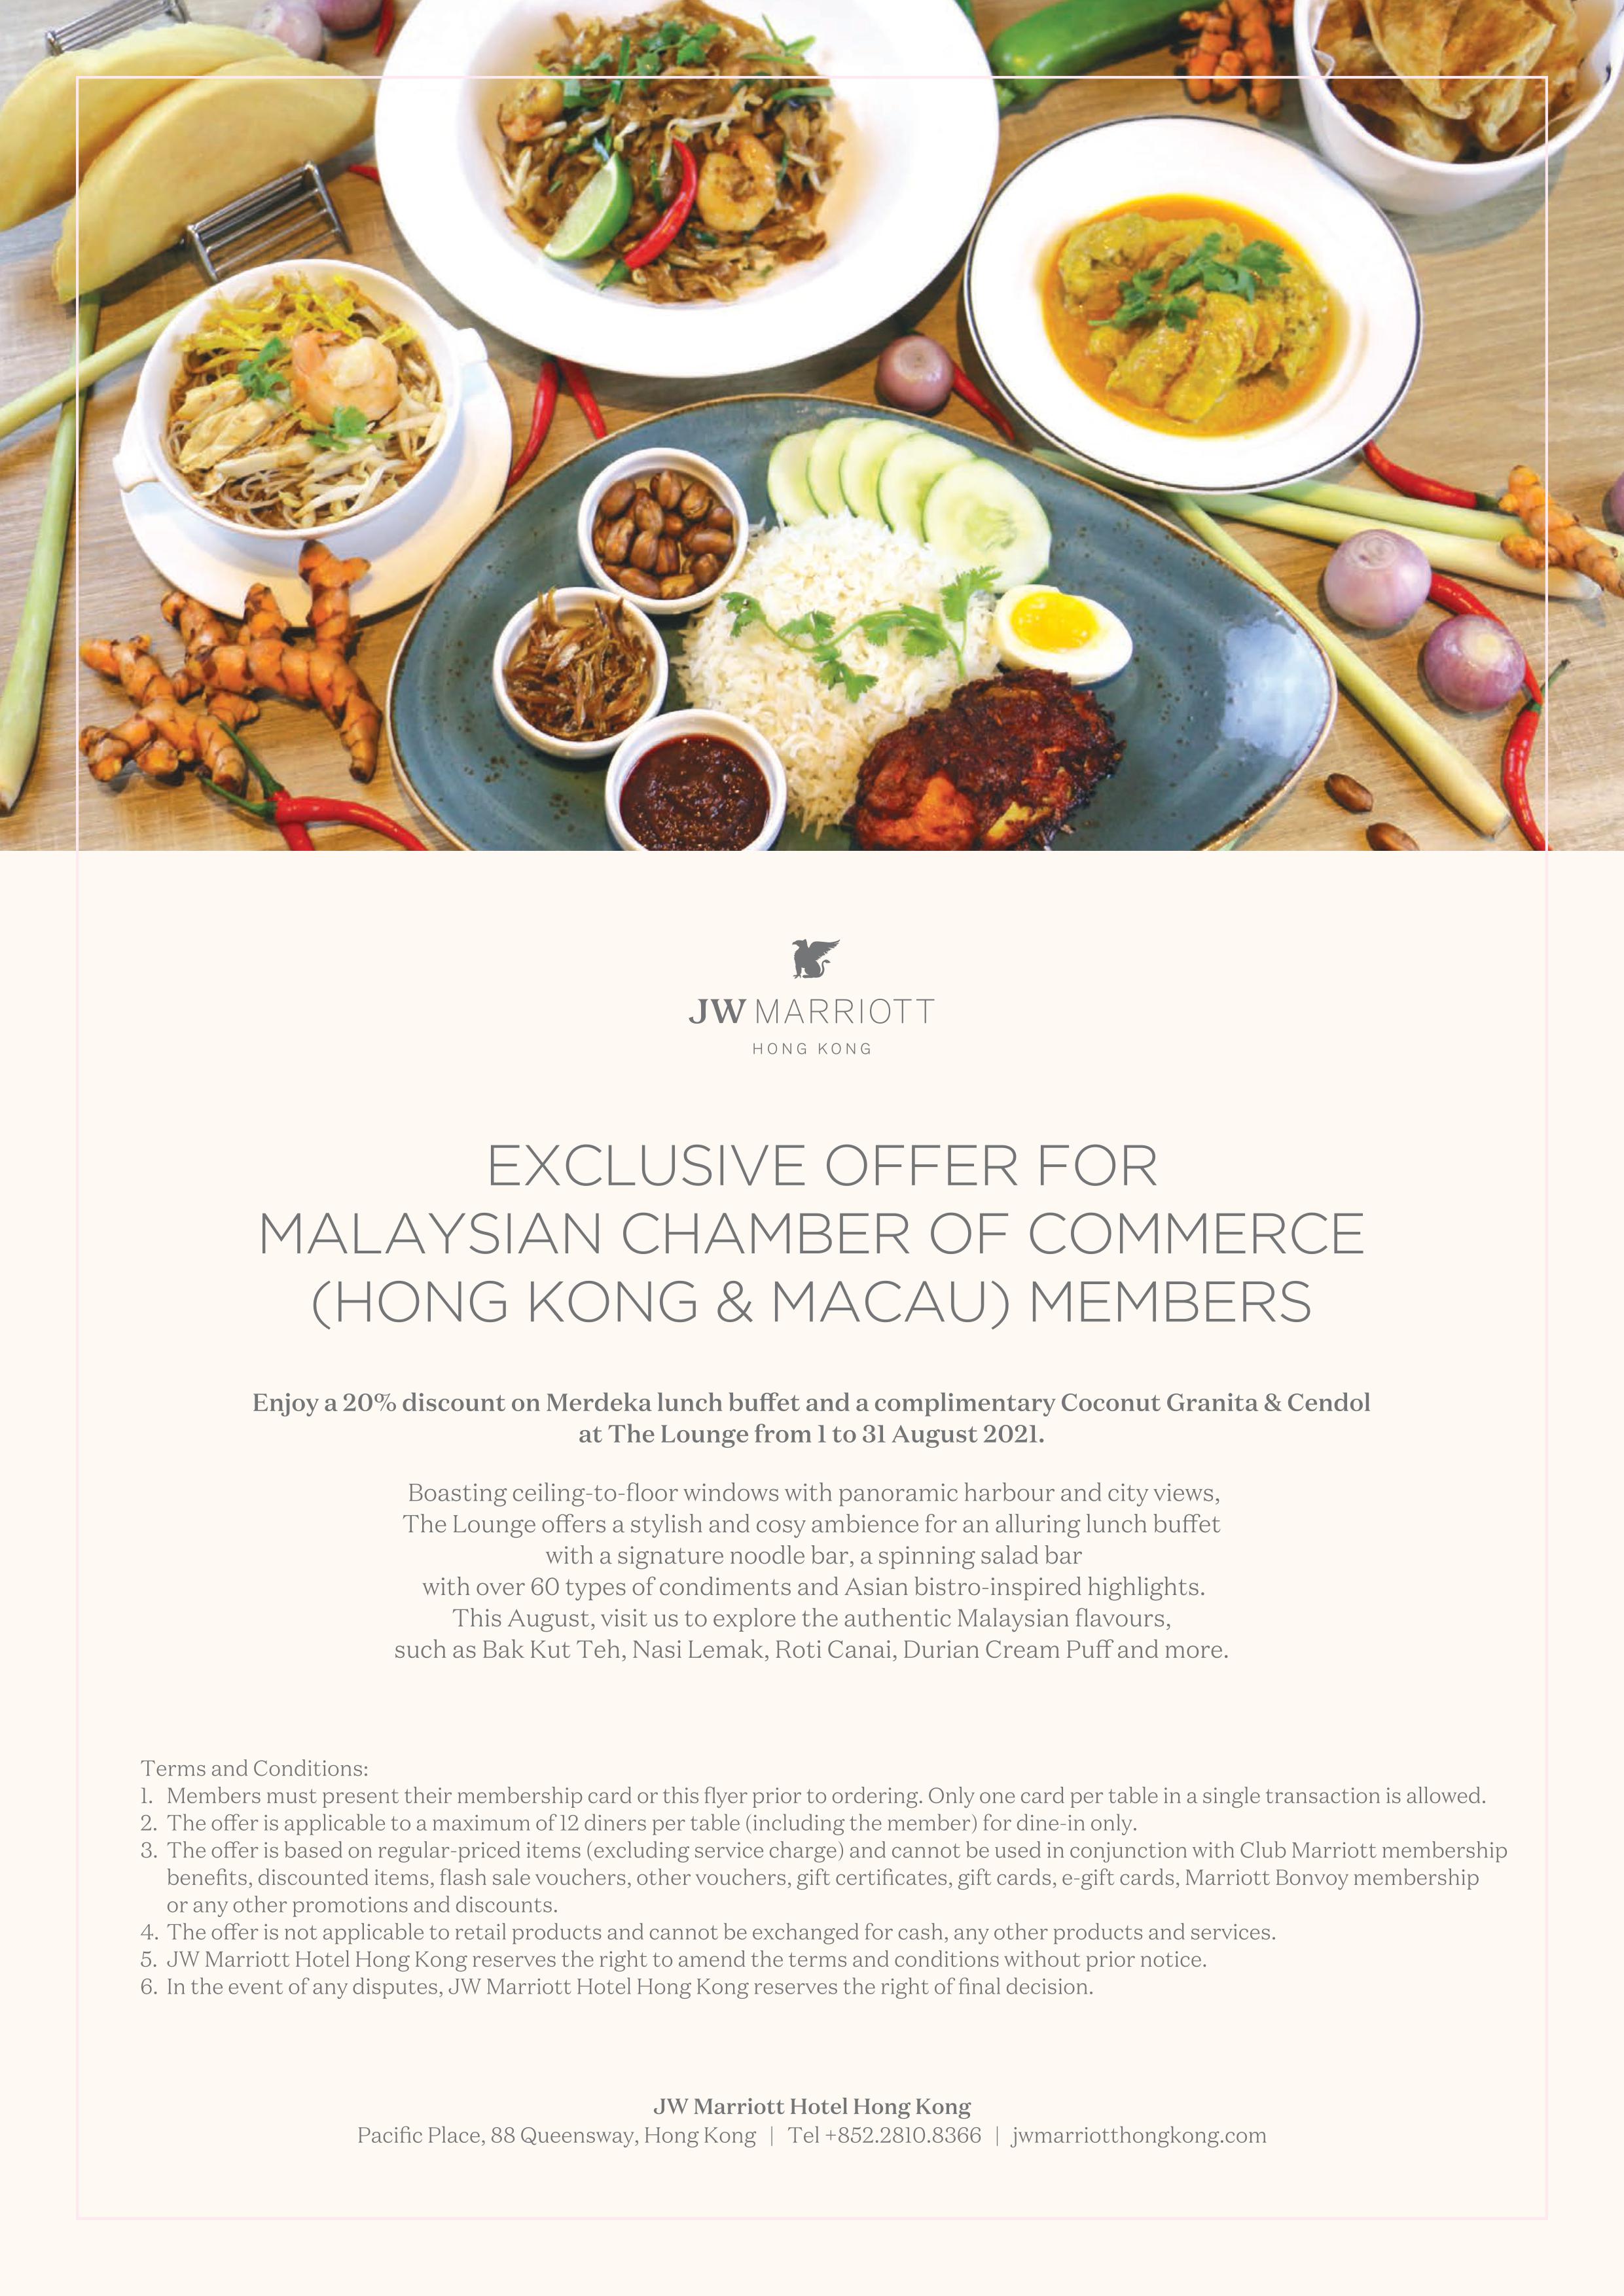 EXCLUSIVE OFFER at JW Marriott Hong Kong for MAYCHAM members